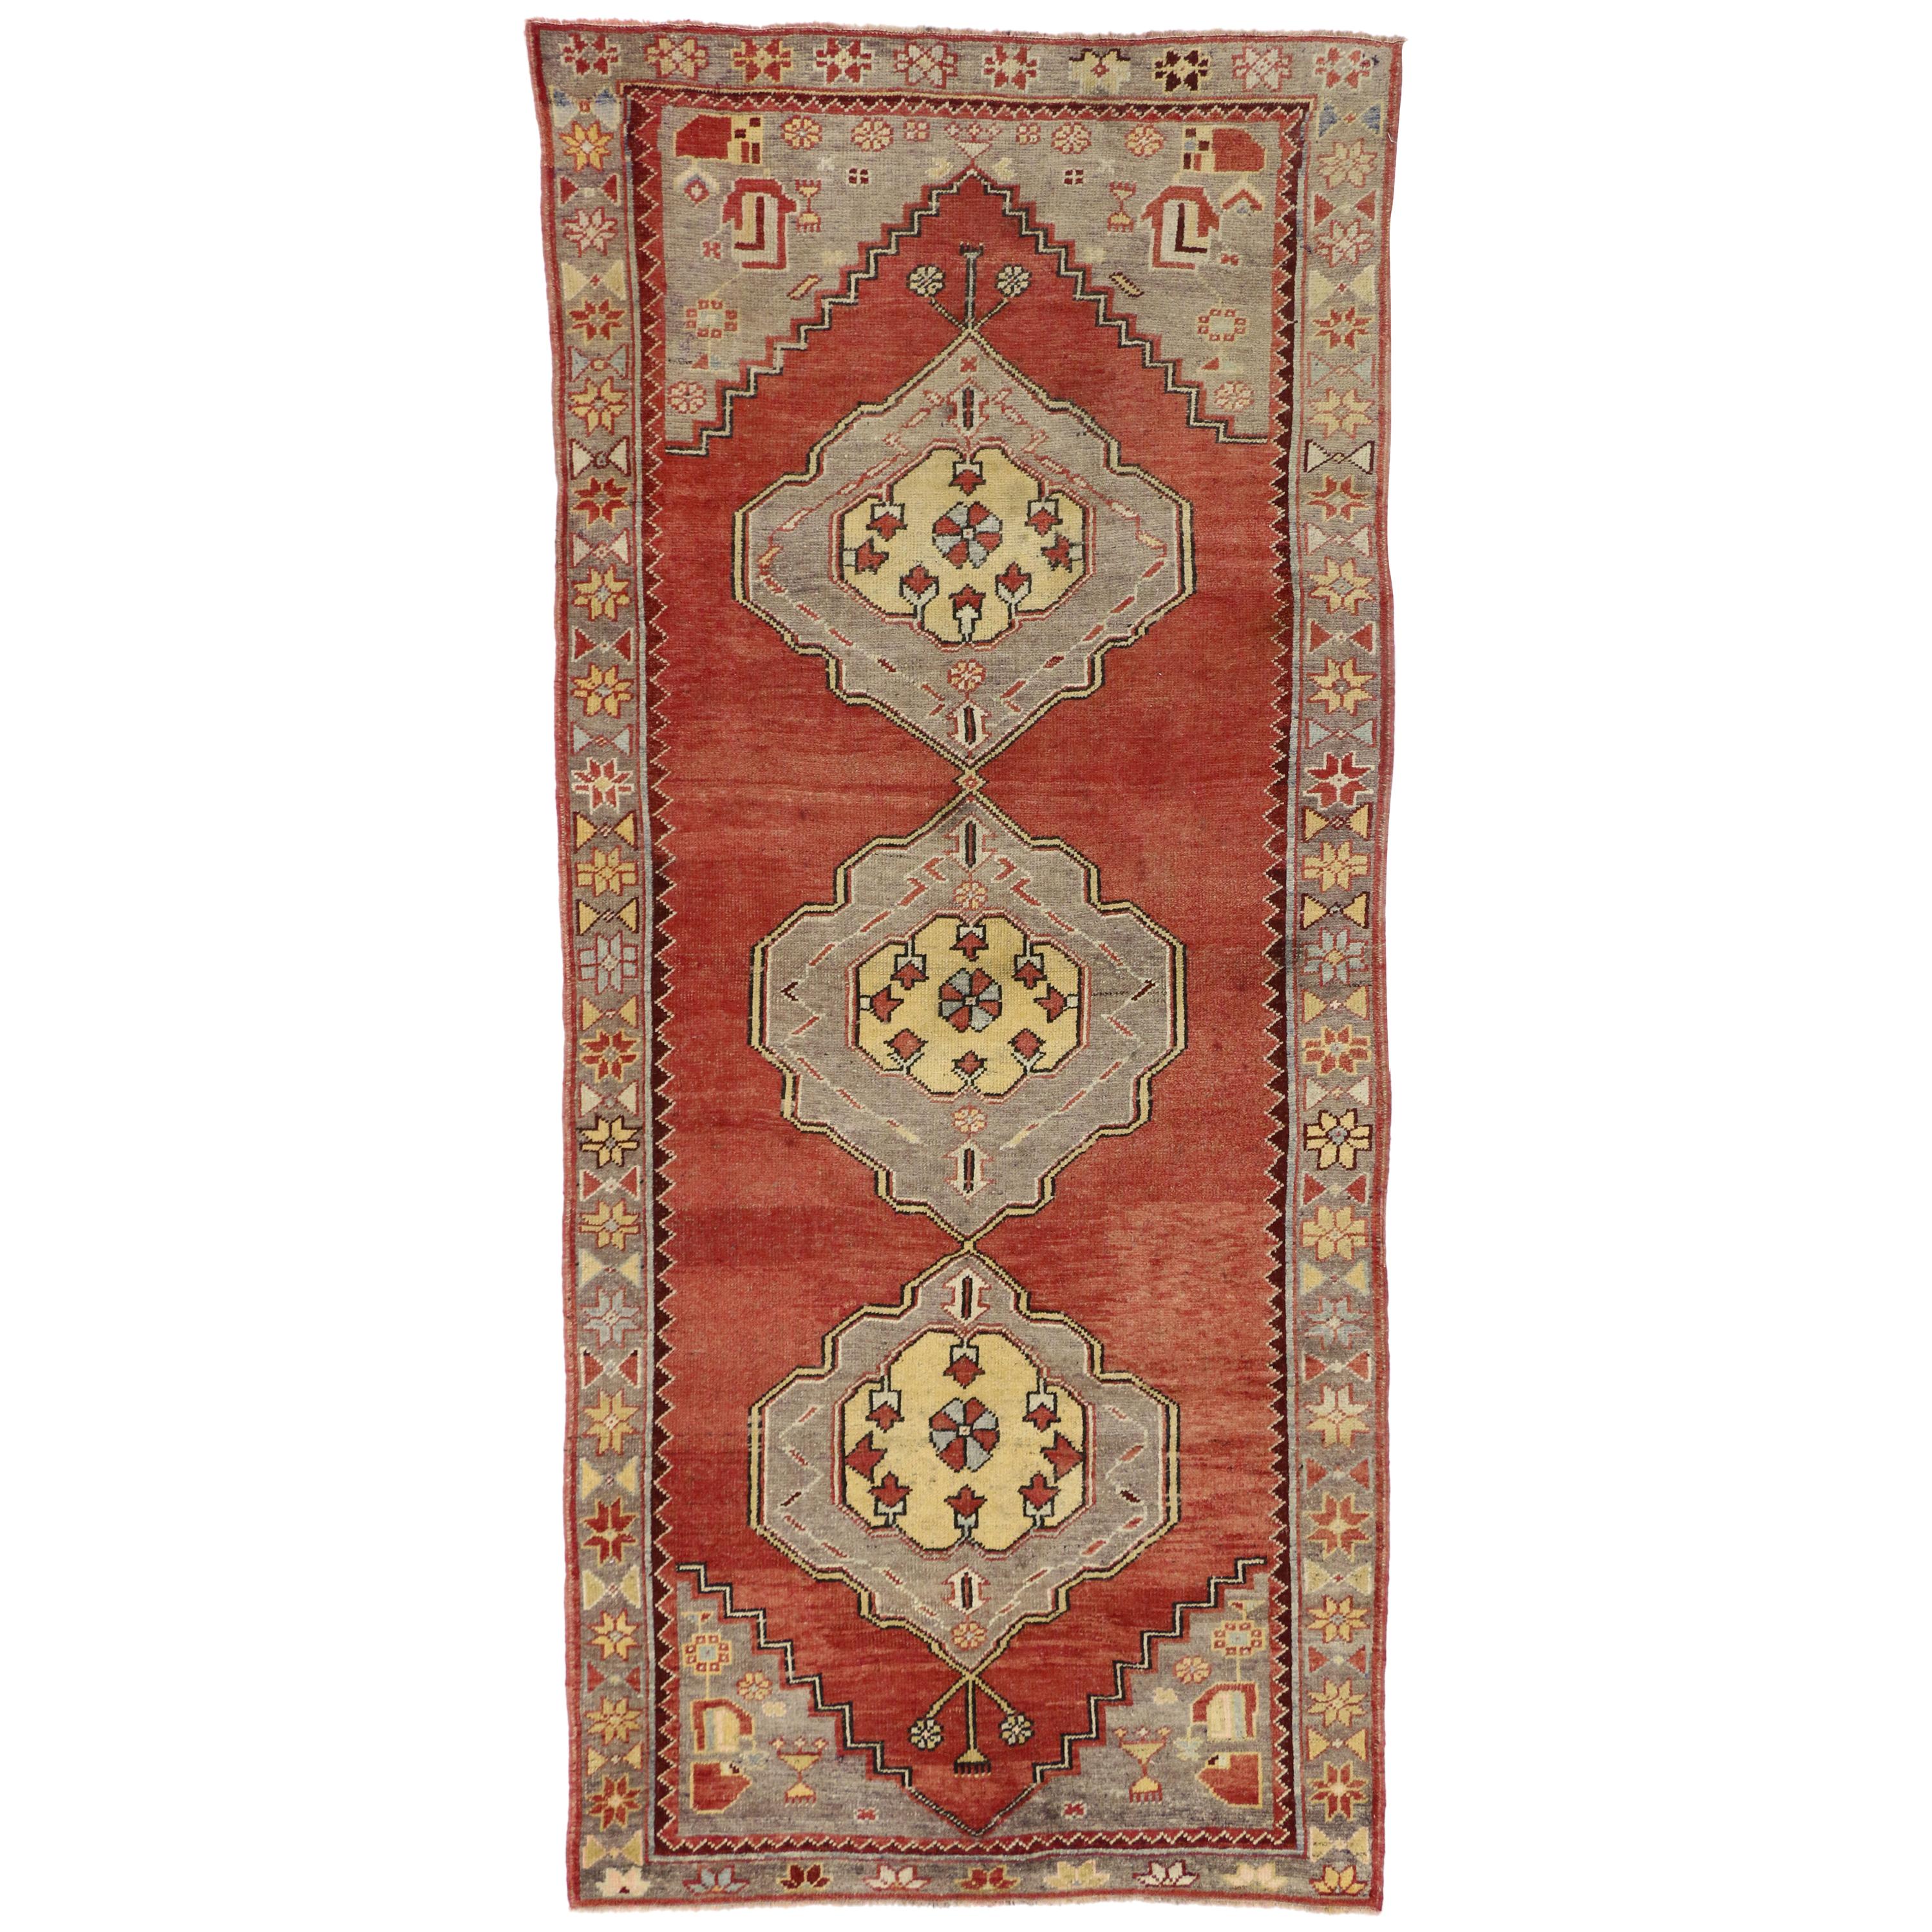 Vintage Turkish Oushak Runner with French Provincial Style, Wide Hallway Runner